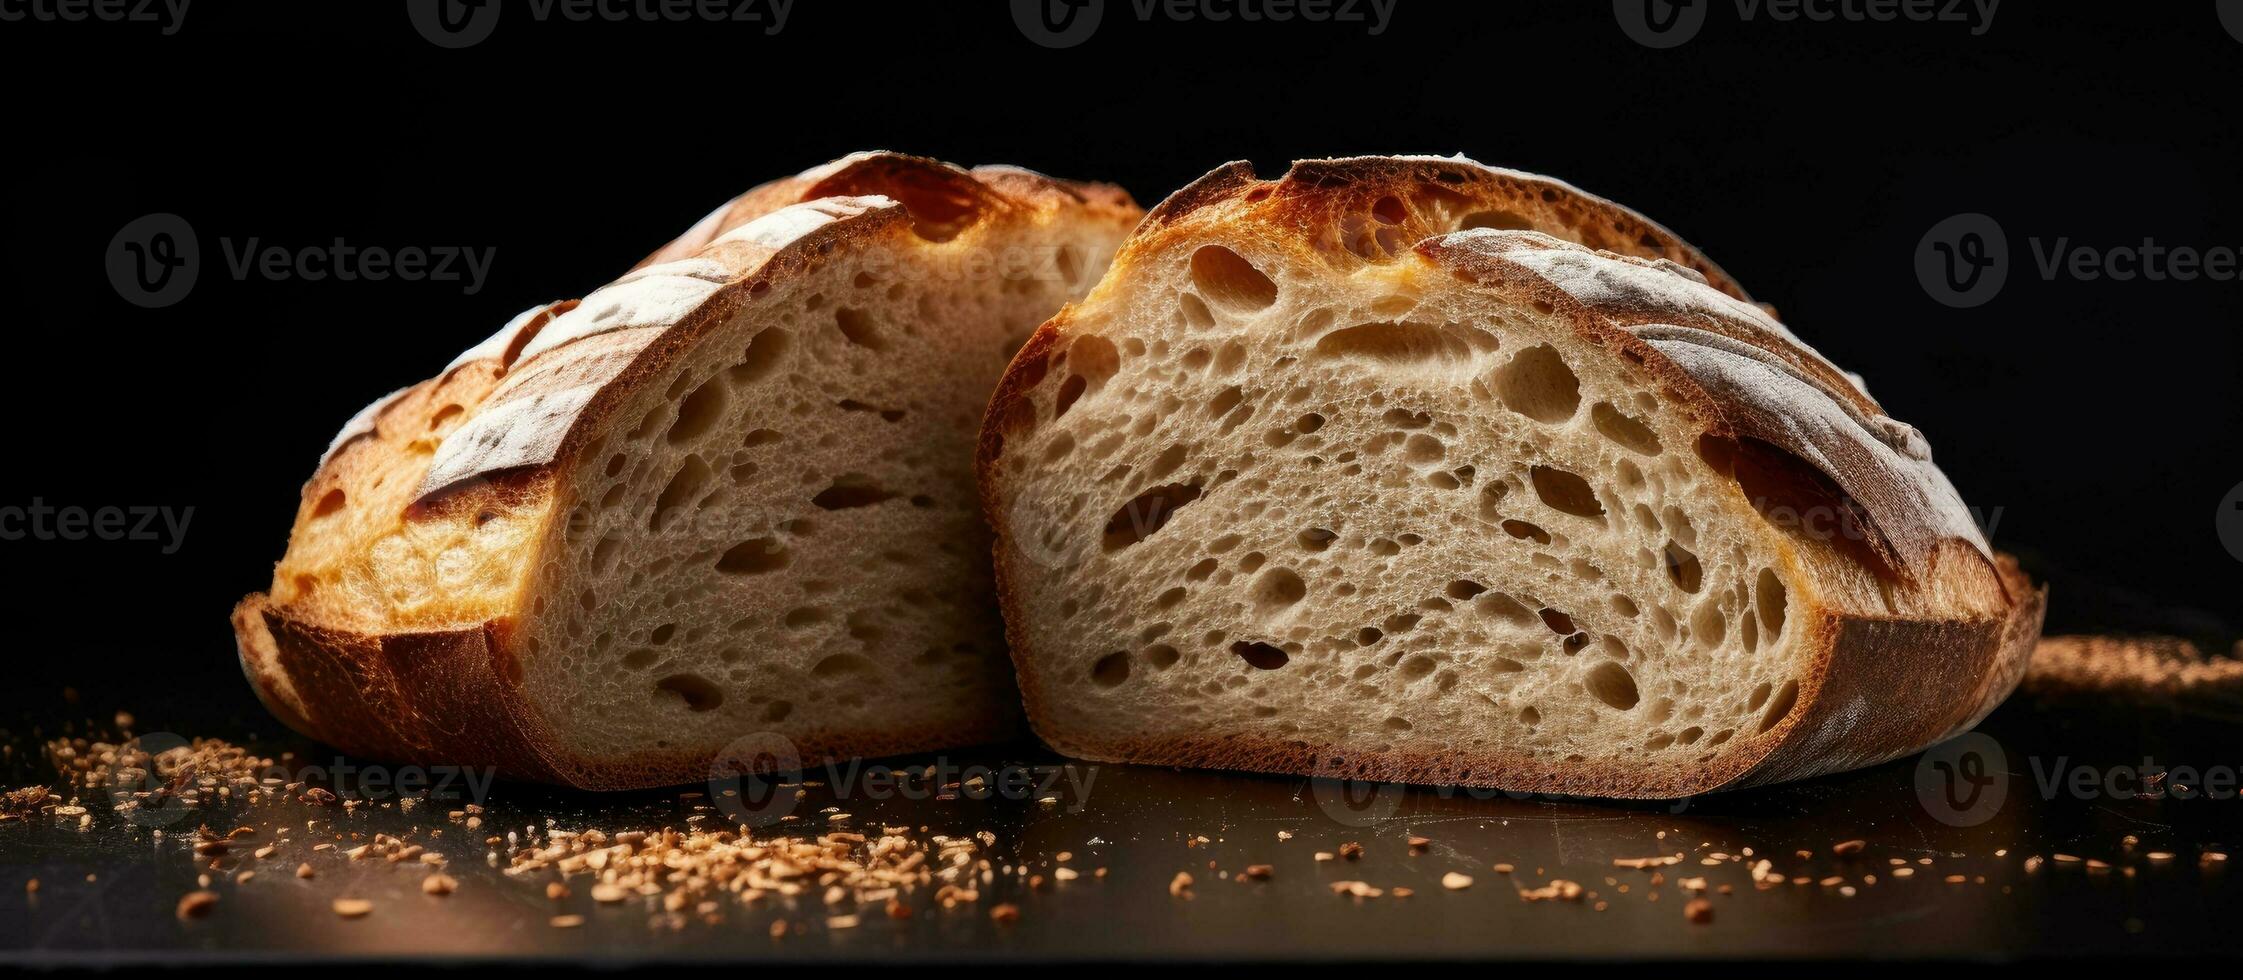 Freshly baked artisan sourdough bread, sliced and placed on a black background with copy space photo